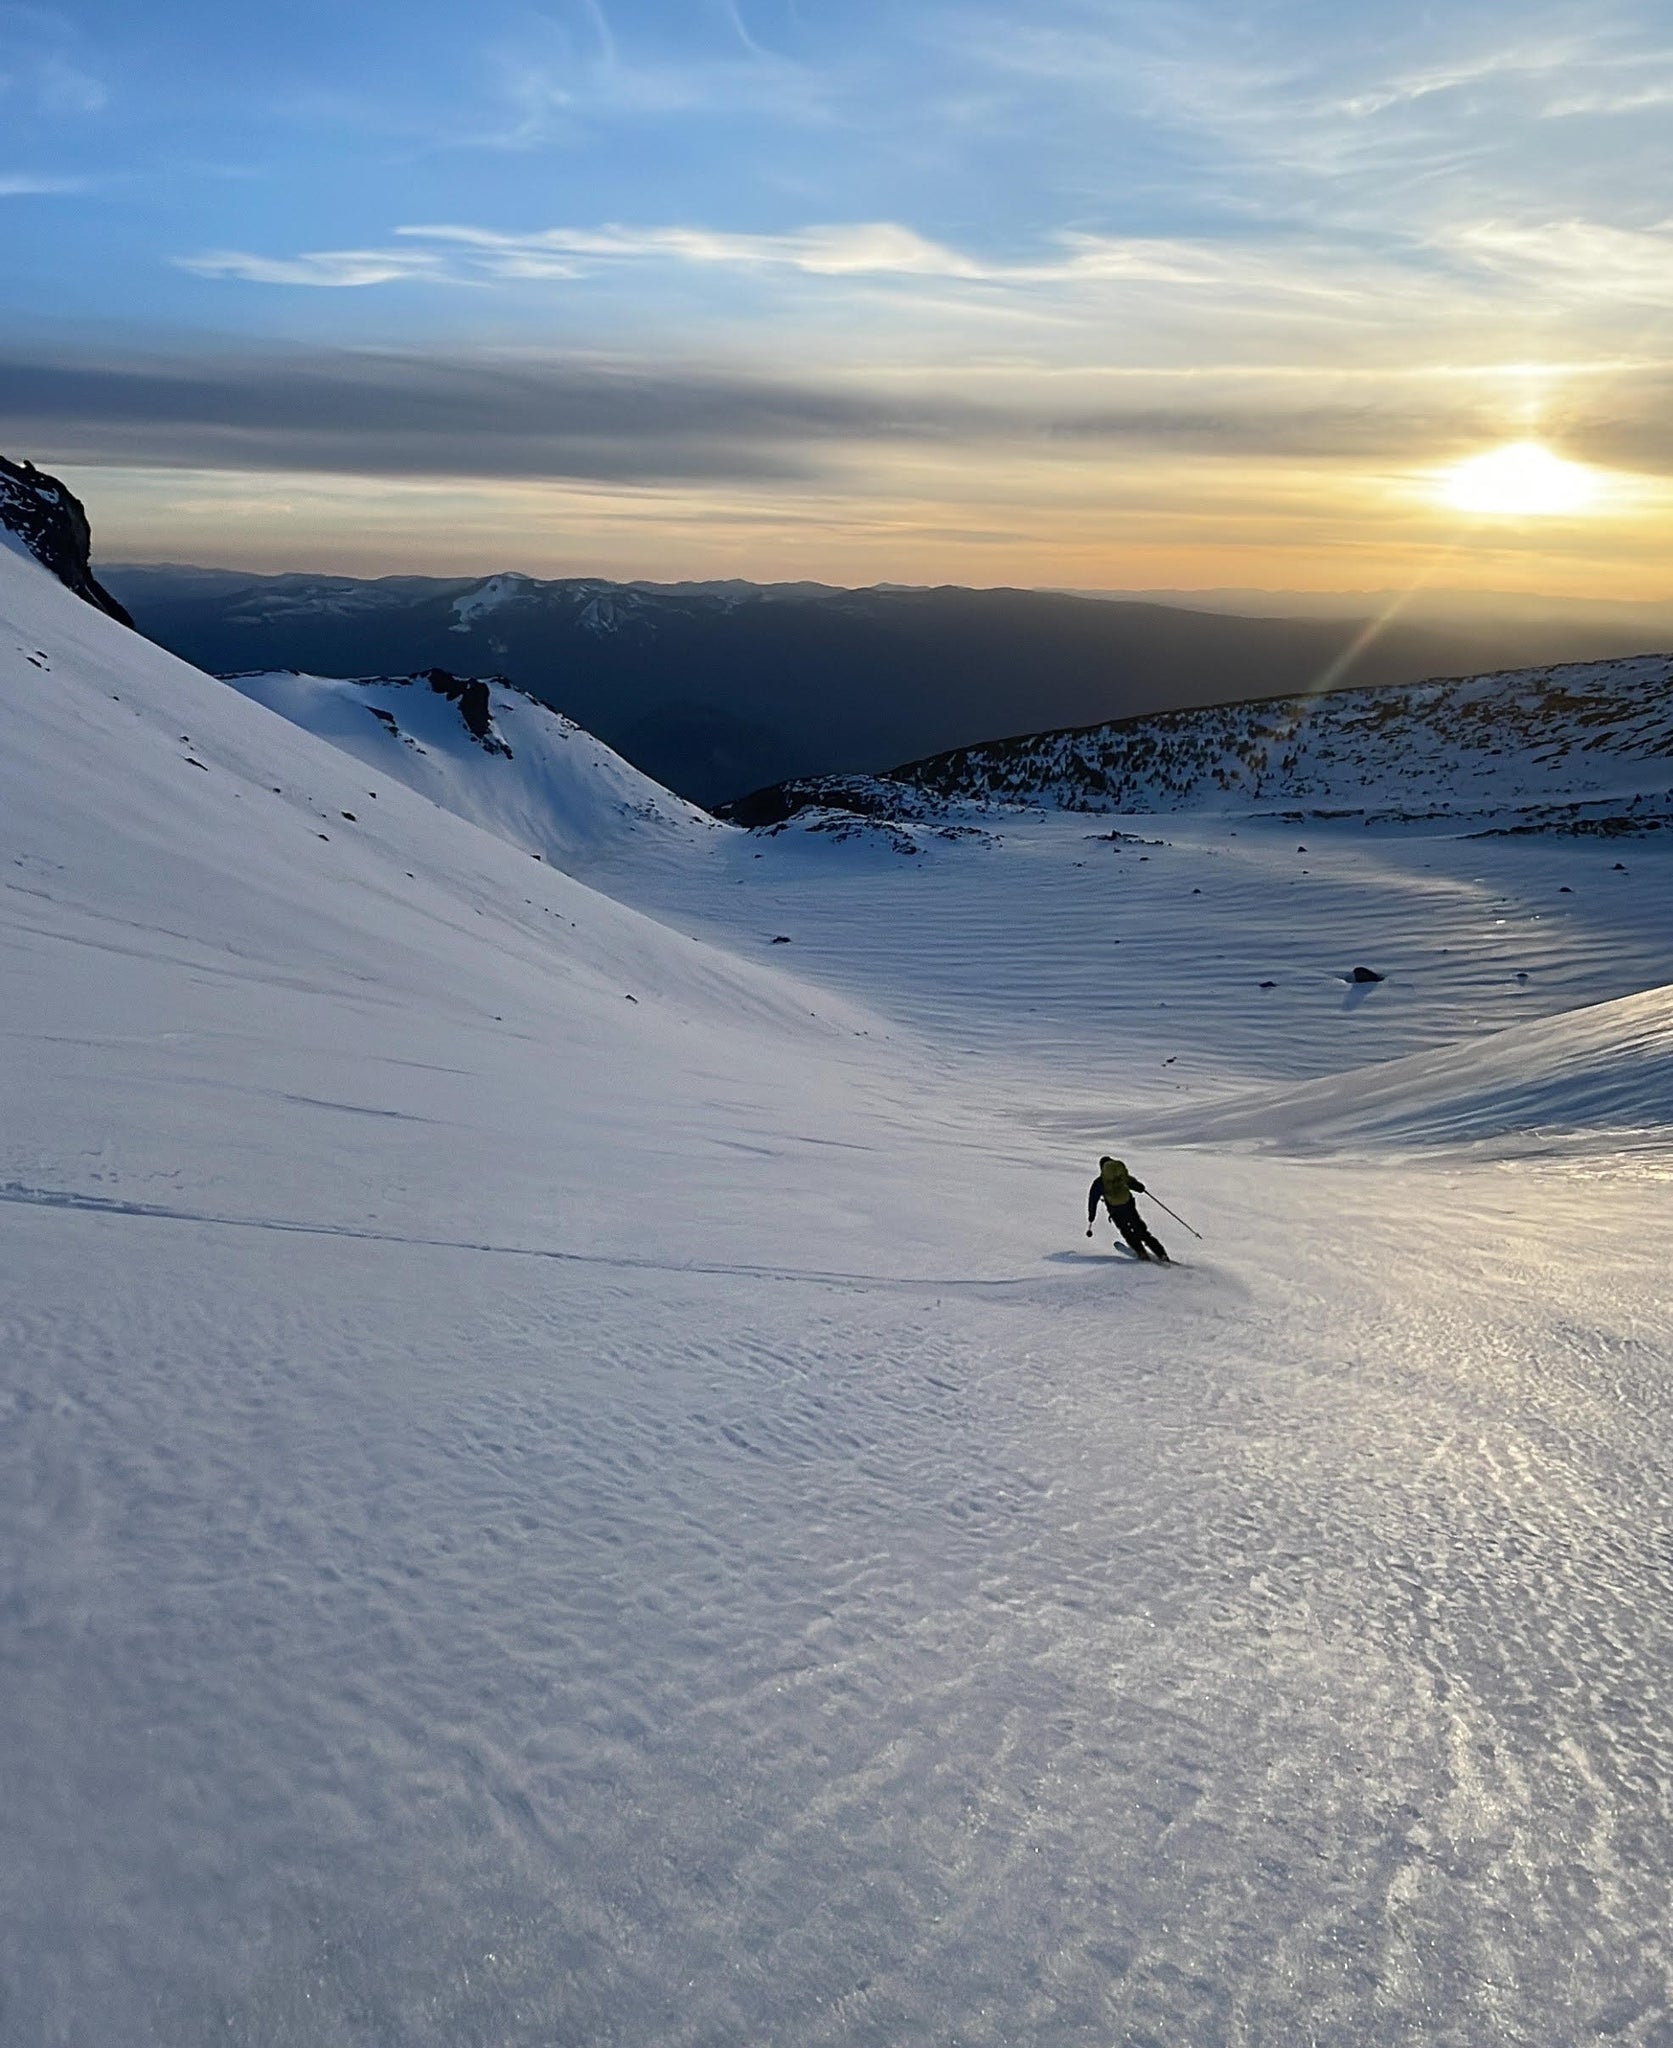 Ski mountaineering on Mt. Shasta using ice axe and crampons